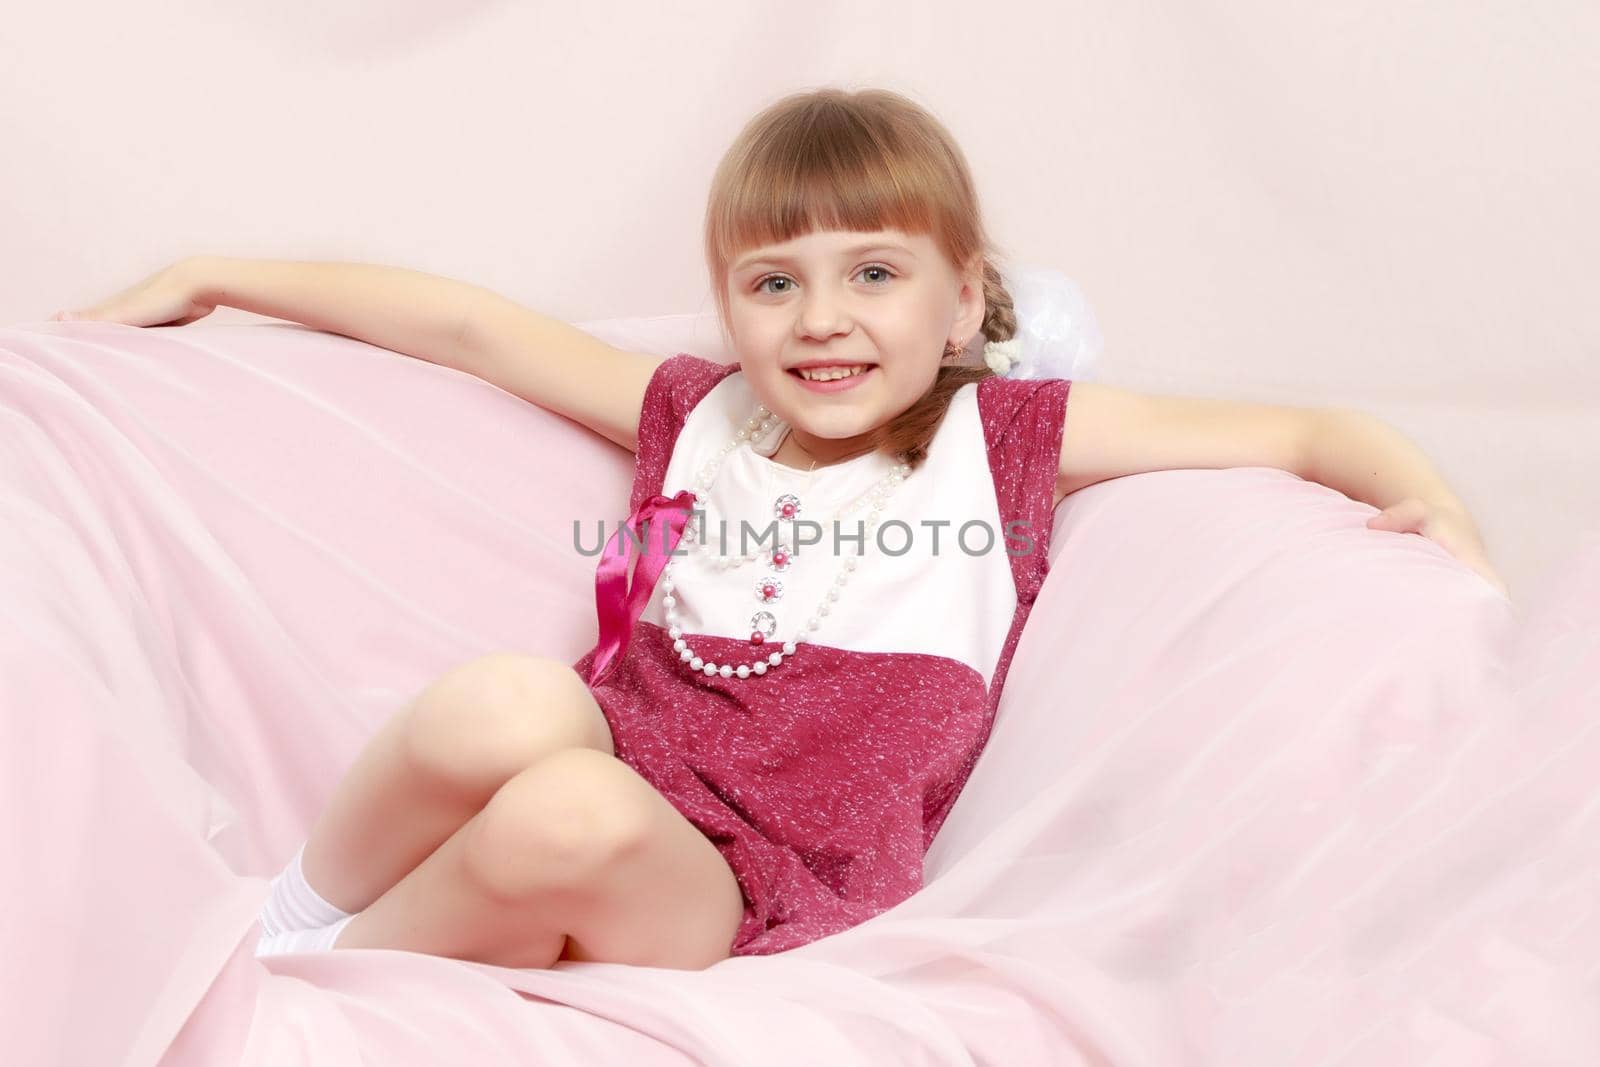 Beautiful little blonde girl with short bangs and pigtails on her head in a good mood.She sits on a pink sofa.